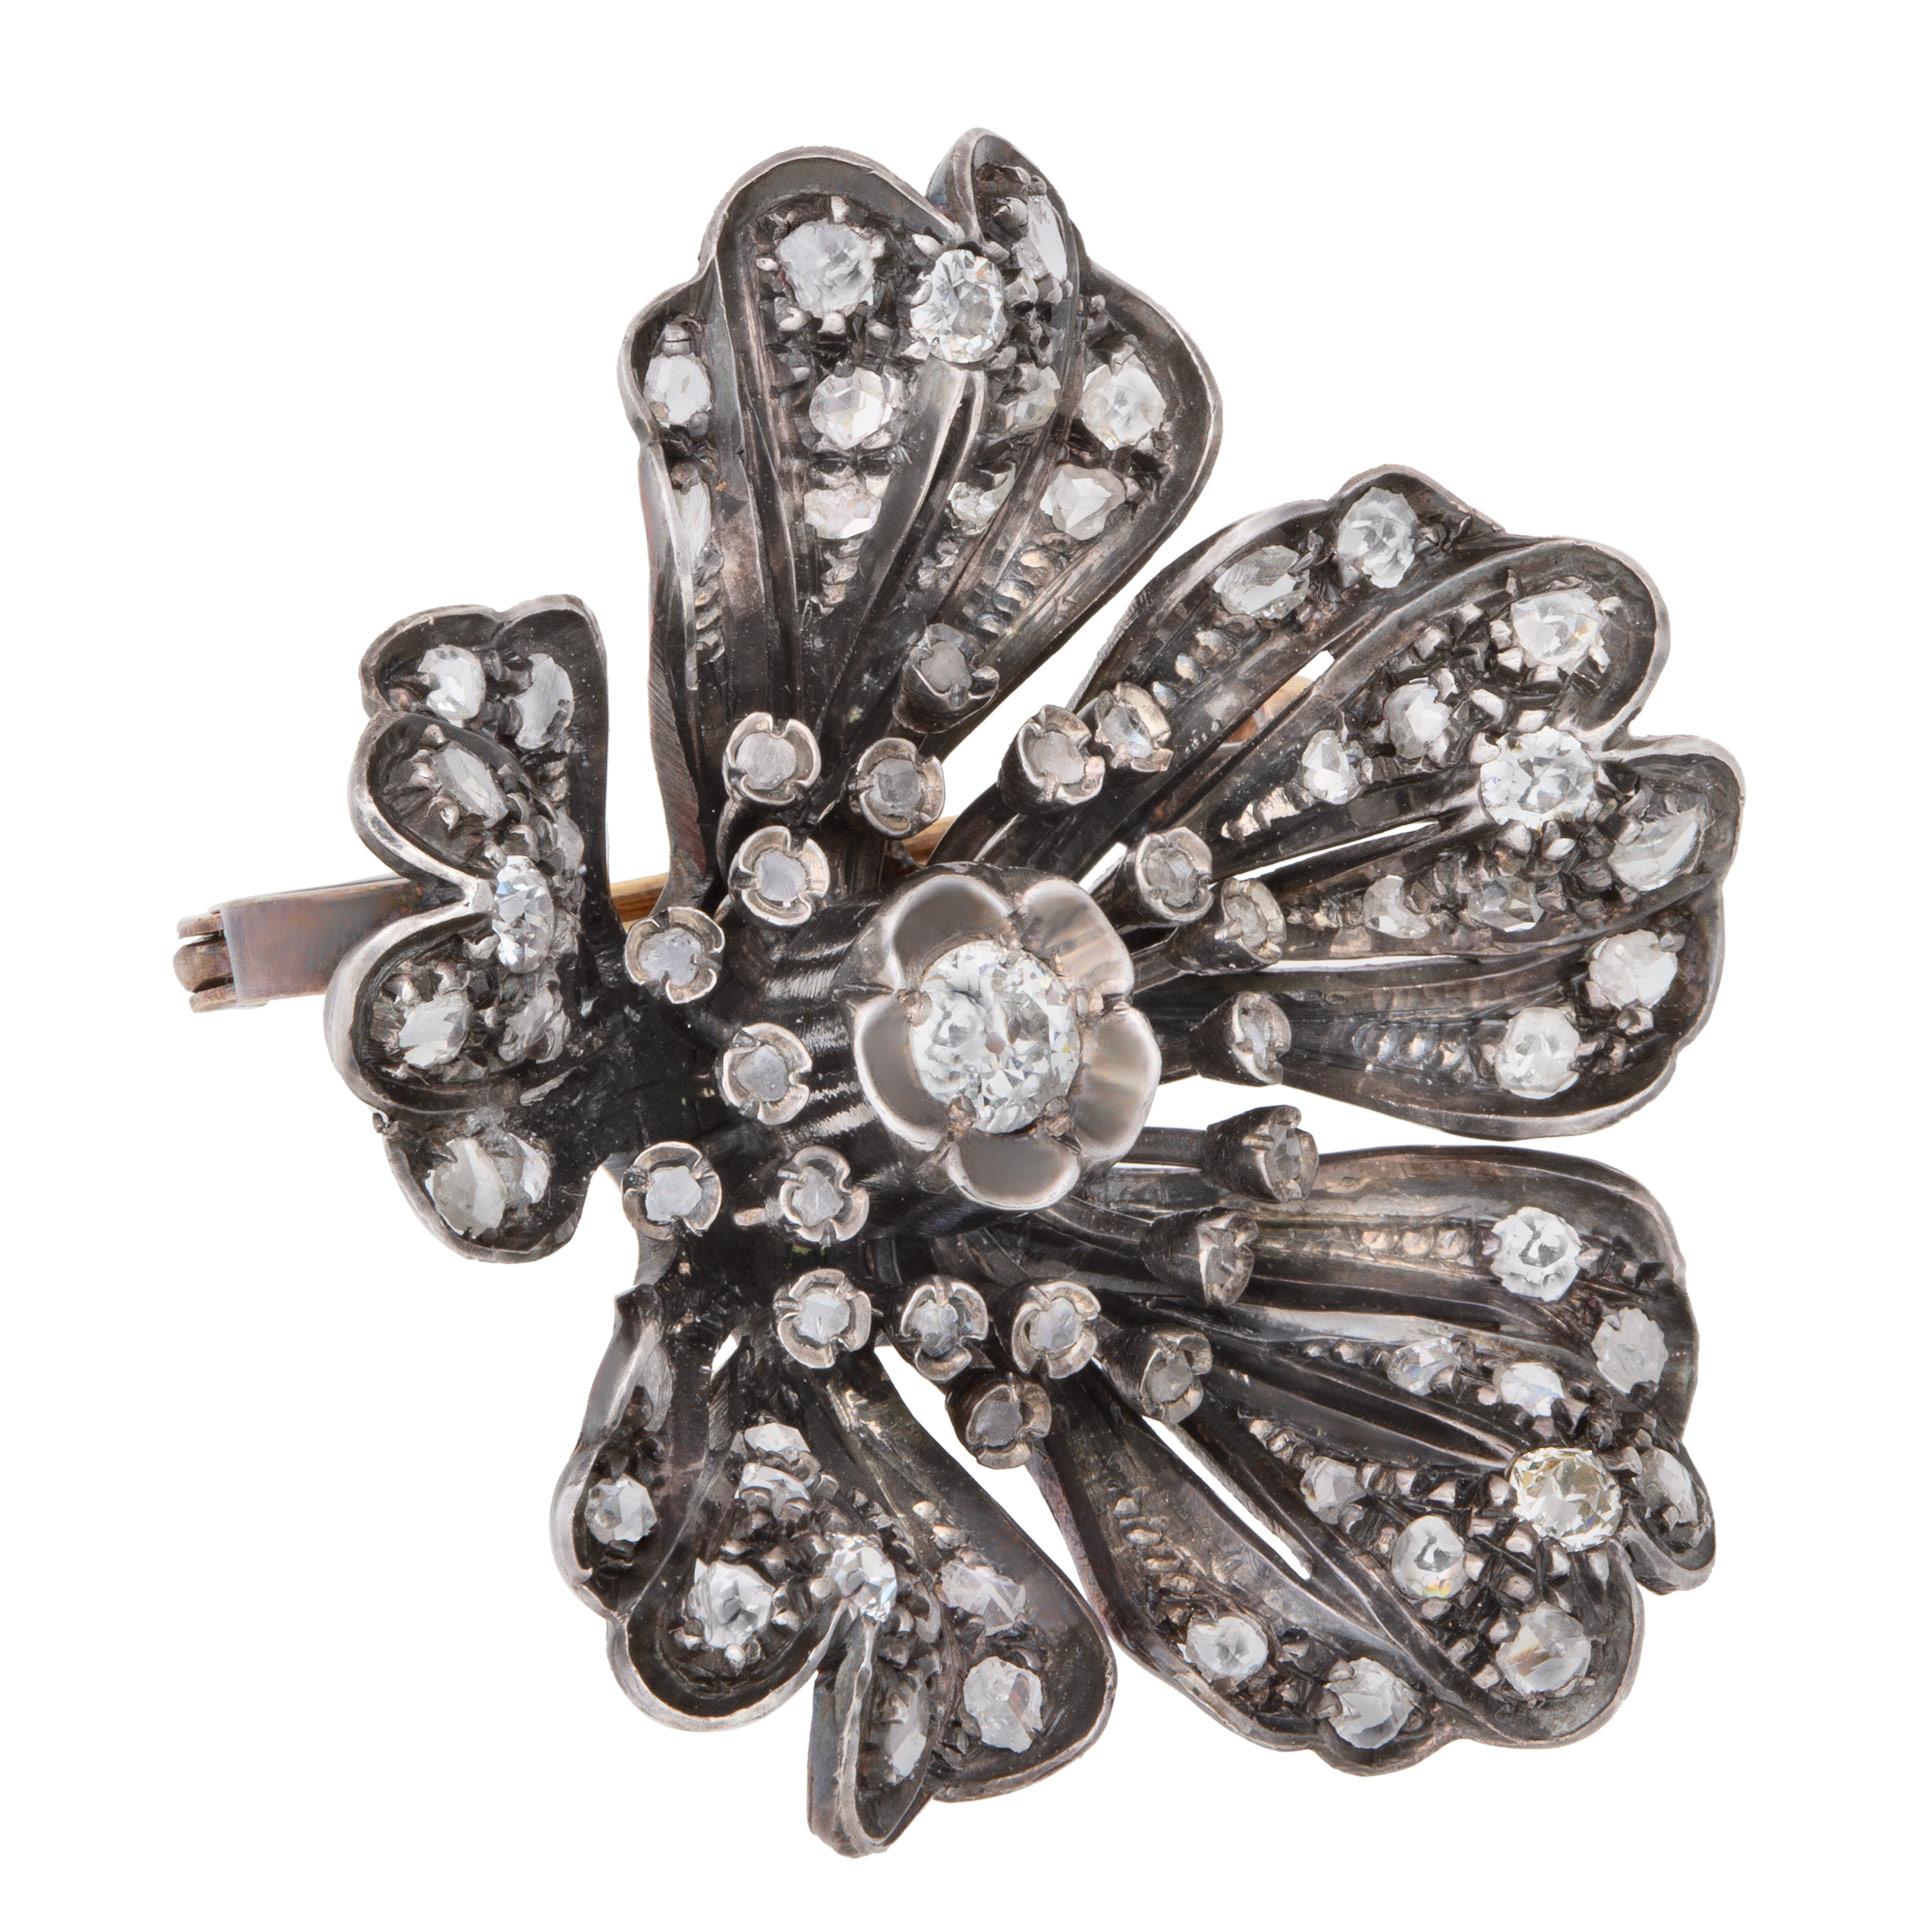 Antique victorian flower brooch/pin/pendant with silver top and gold with over 2 carats in old mine diamonds. Size 1.50 inches by 1.50 inches.
